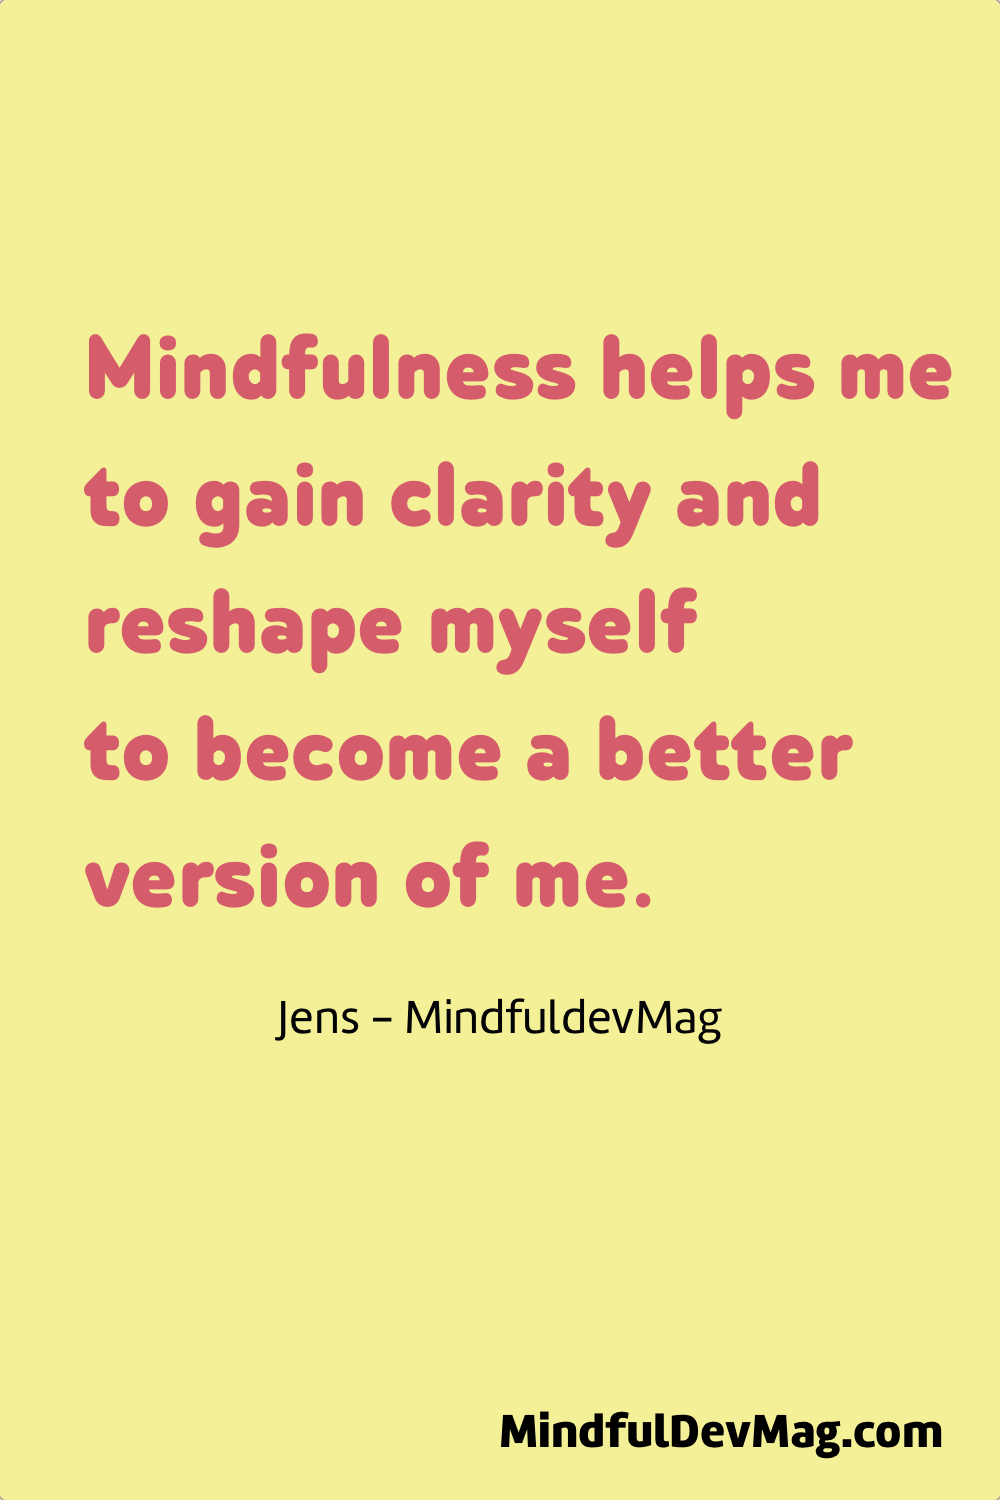 Mindful quote: Mindfulness helps me to gain clarity and reshape myself to become a better version of me. - Jens - MindfuldevMag